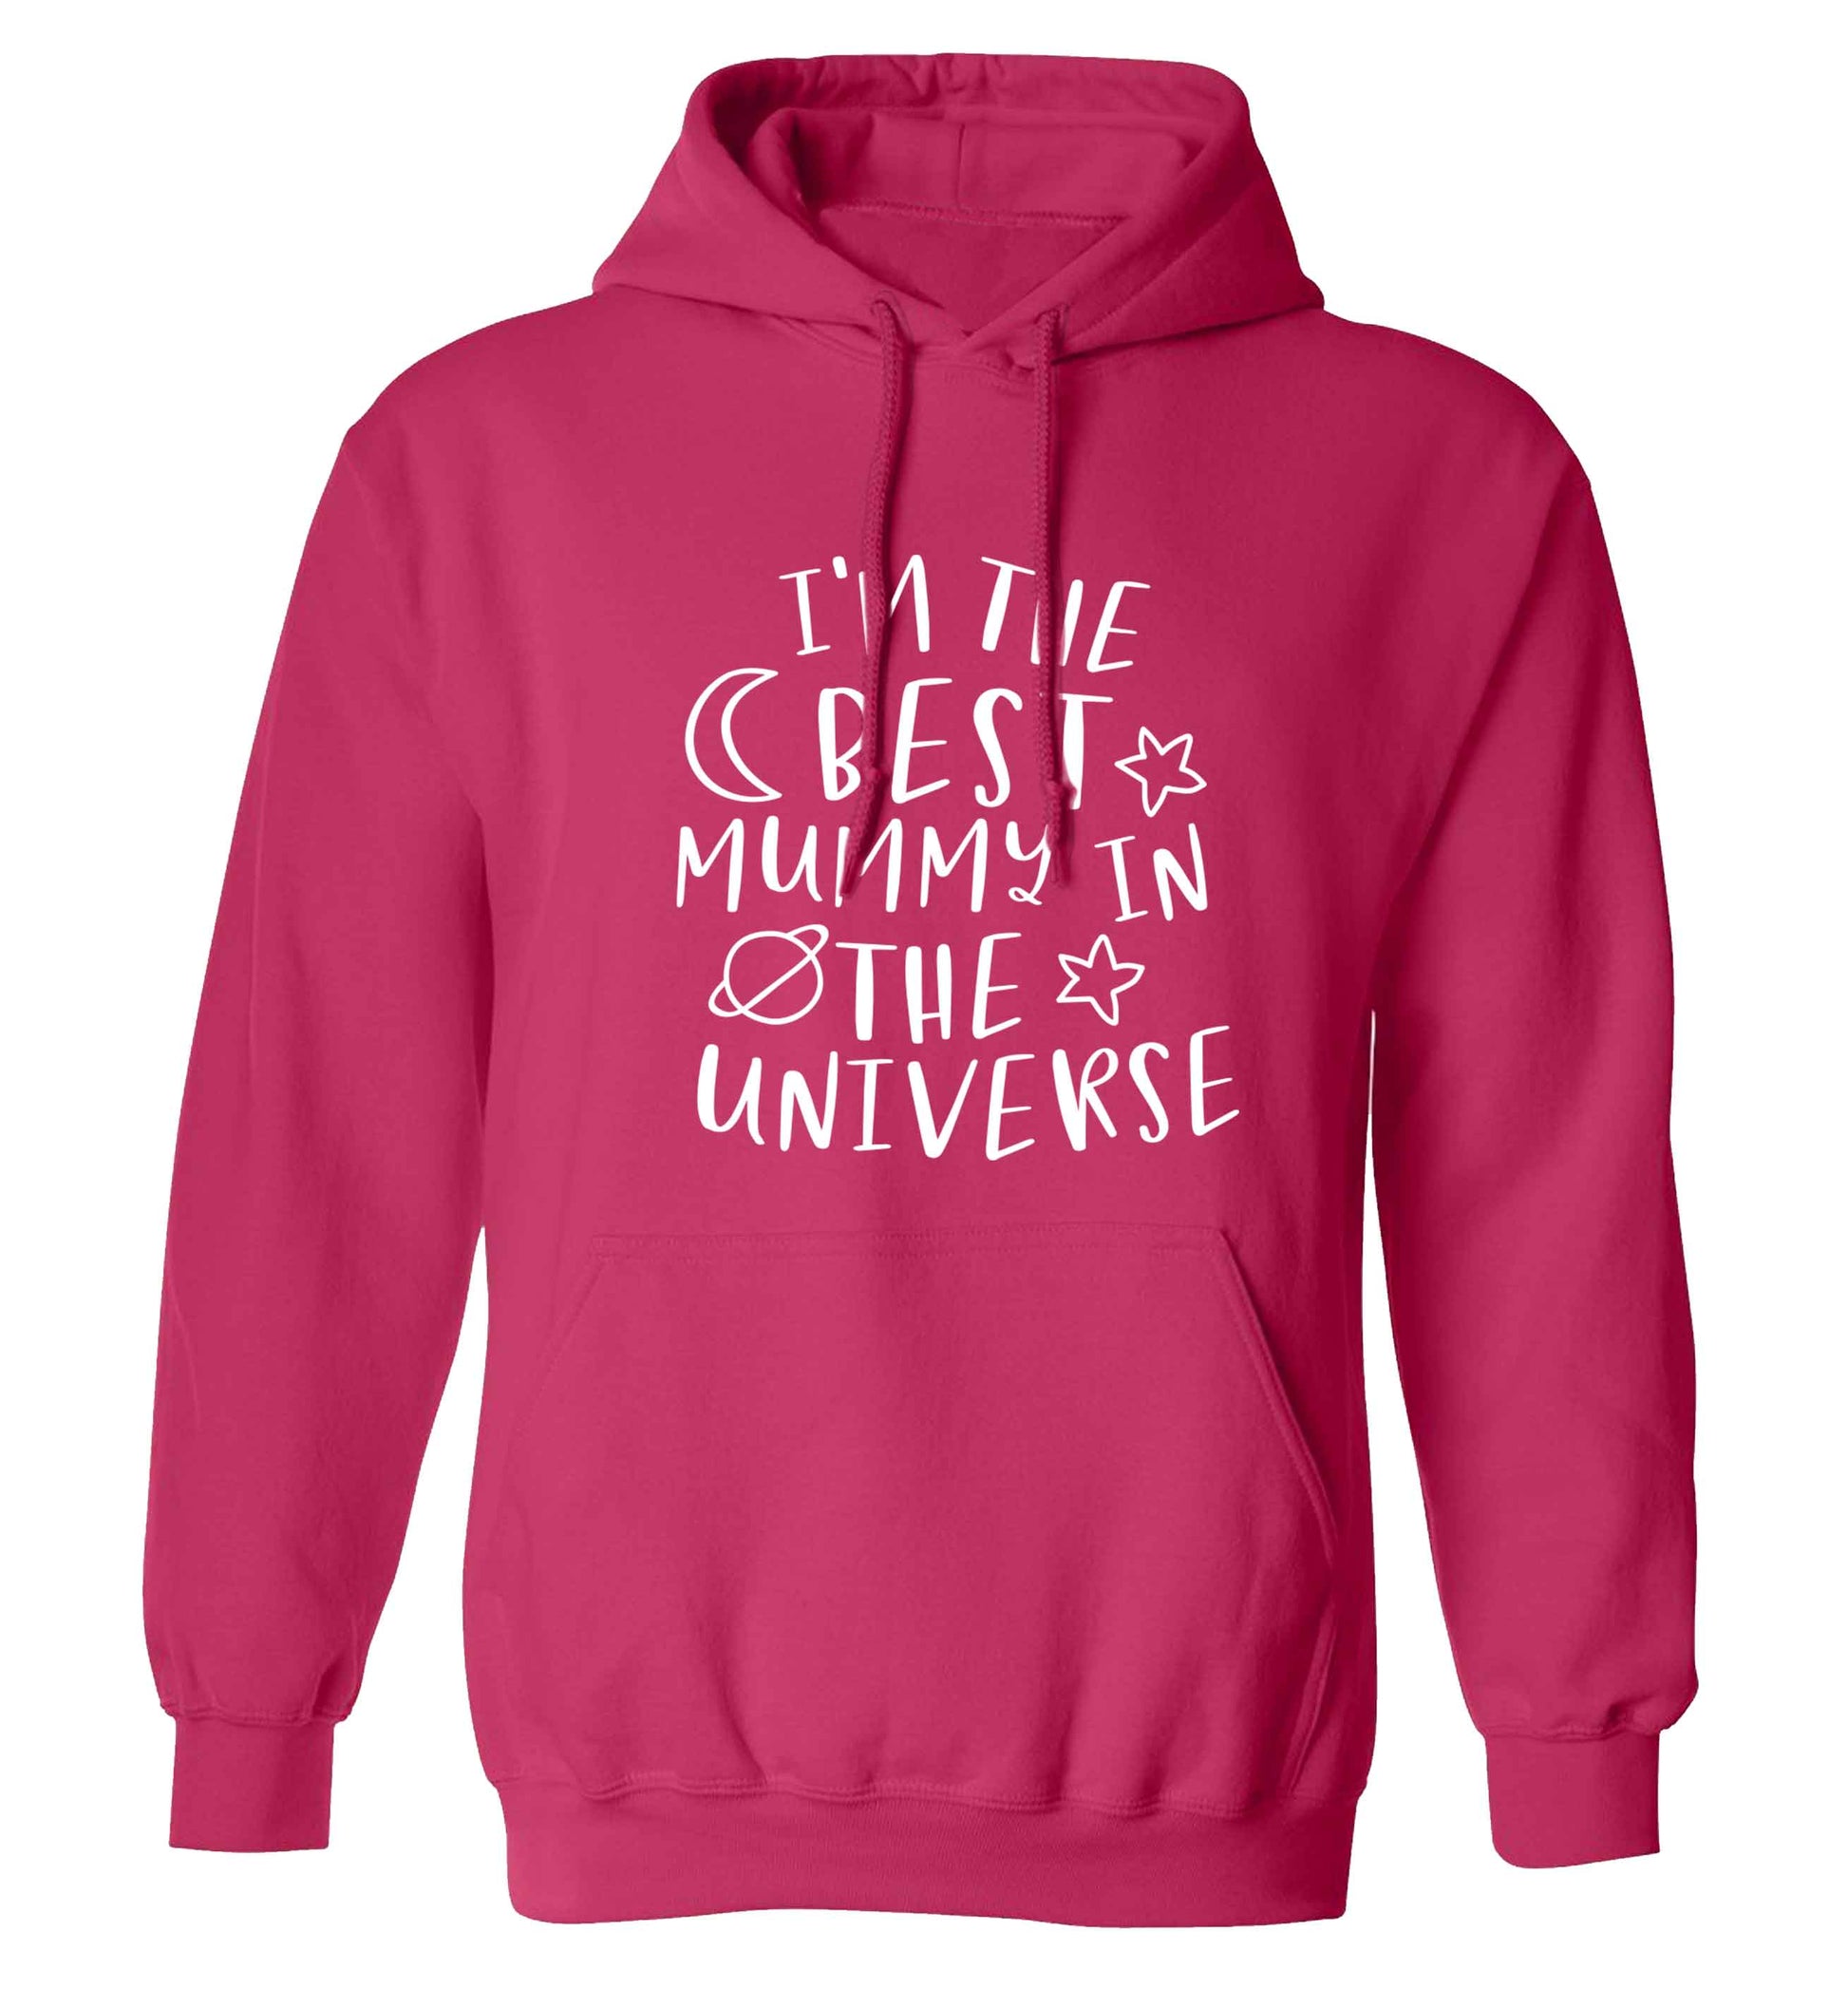 I'm the best mummy in the universe adults unisex pink hoodie 2XL